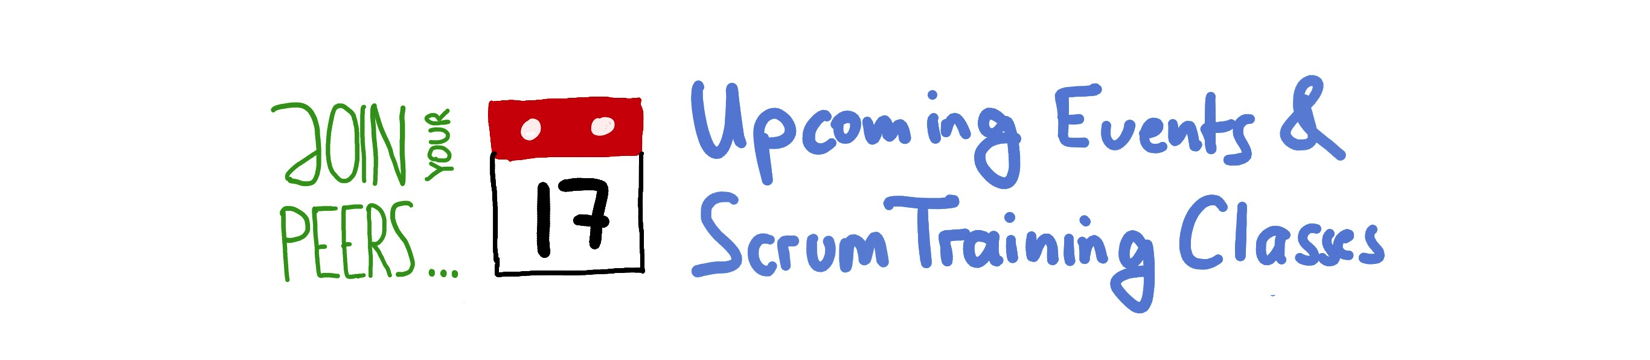 Upcoming Scrum and Liberating Stuctures training classes and workshops — Berlin Product People GmbH